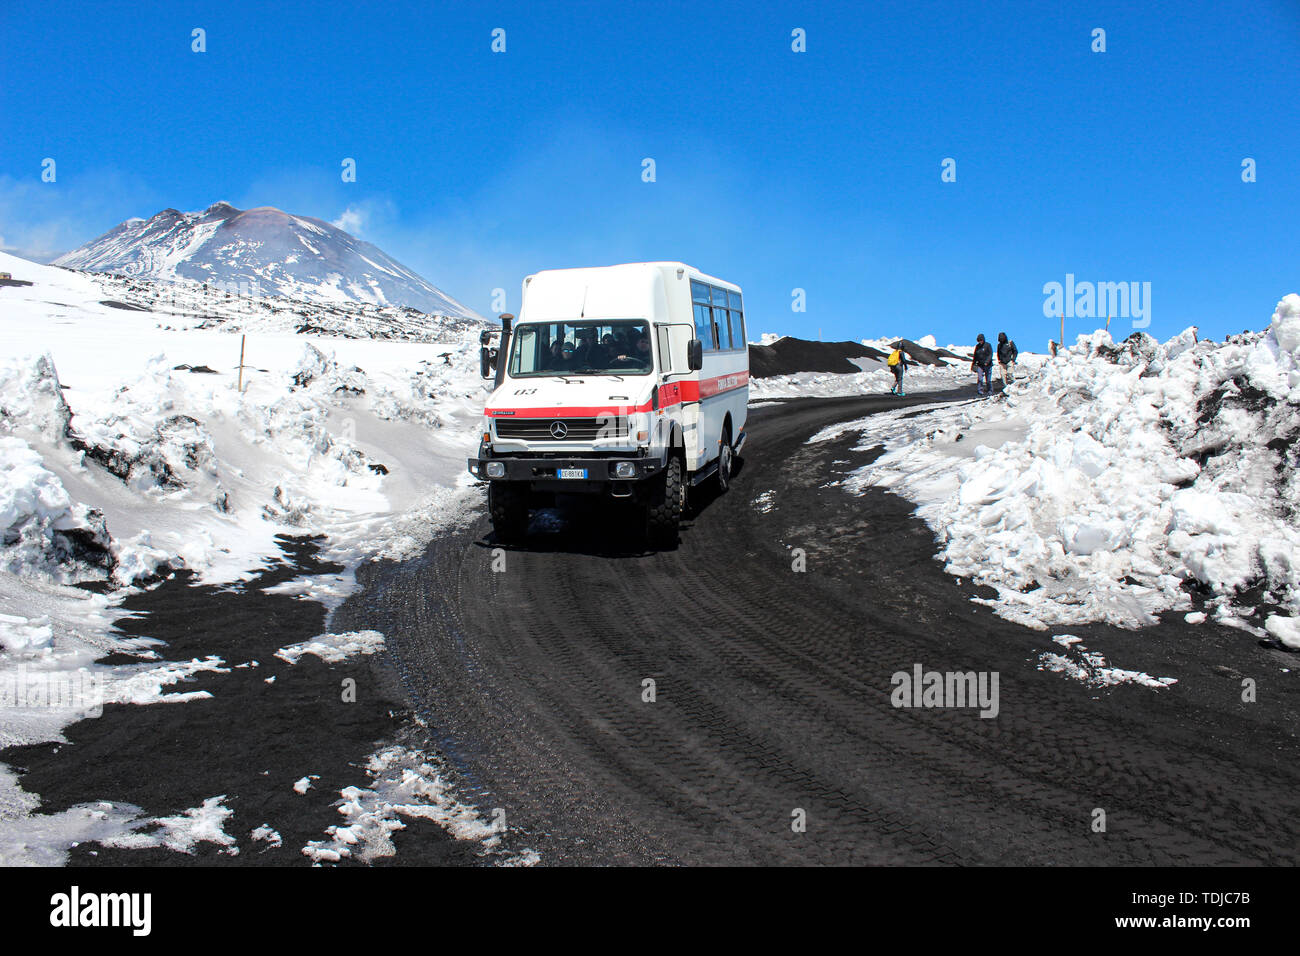 Etna, Sicily, Italy - Apr 9th 2019: Tourist jeep or bus driving tourists to the top of Etna volcano and back. Snow on the volcanic soil along the road. Very top in the background. Stock Photo